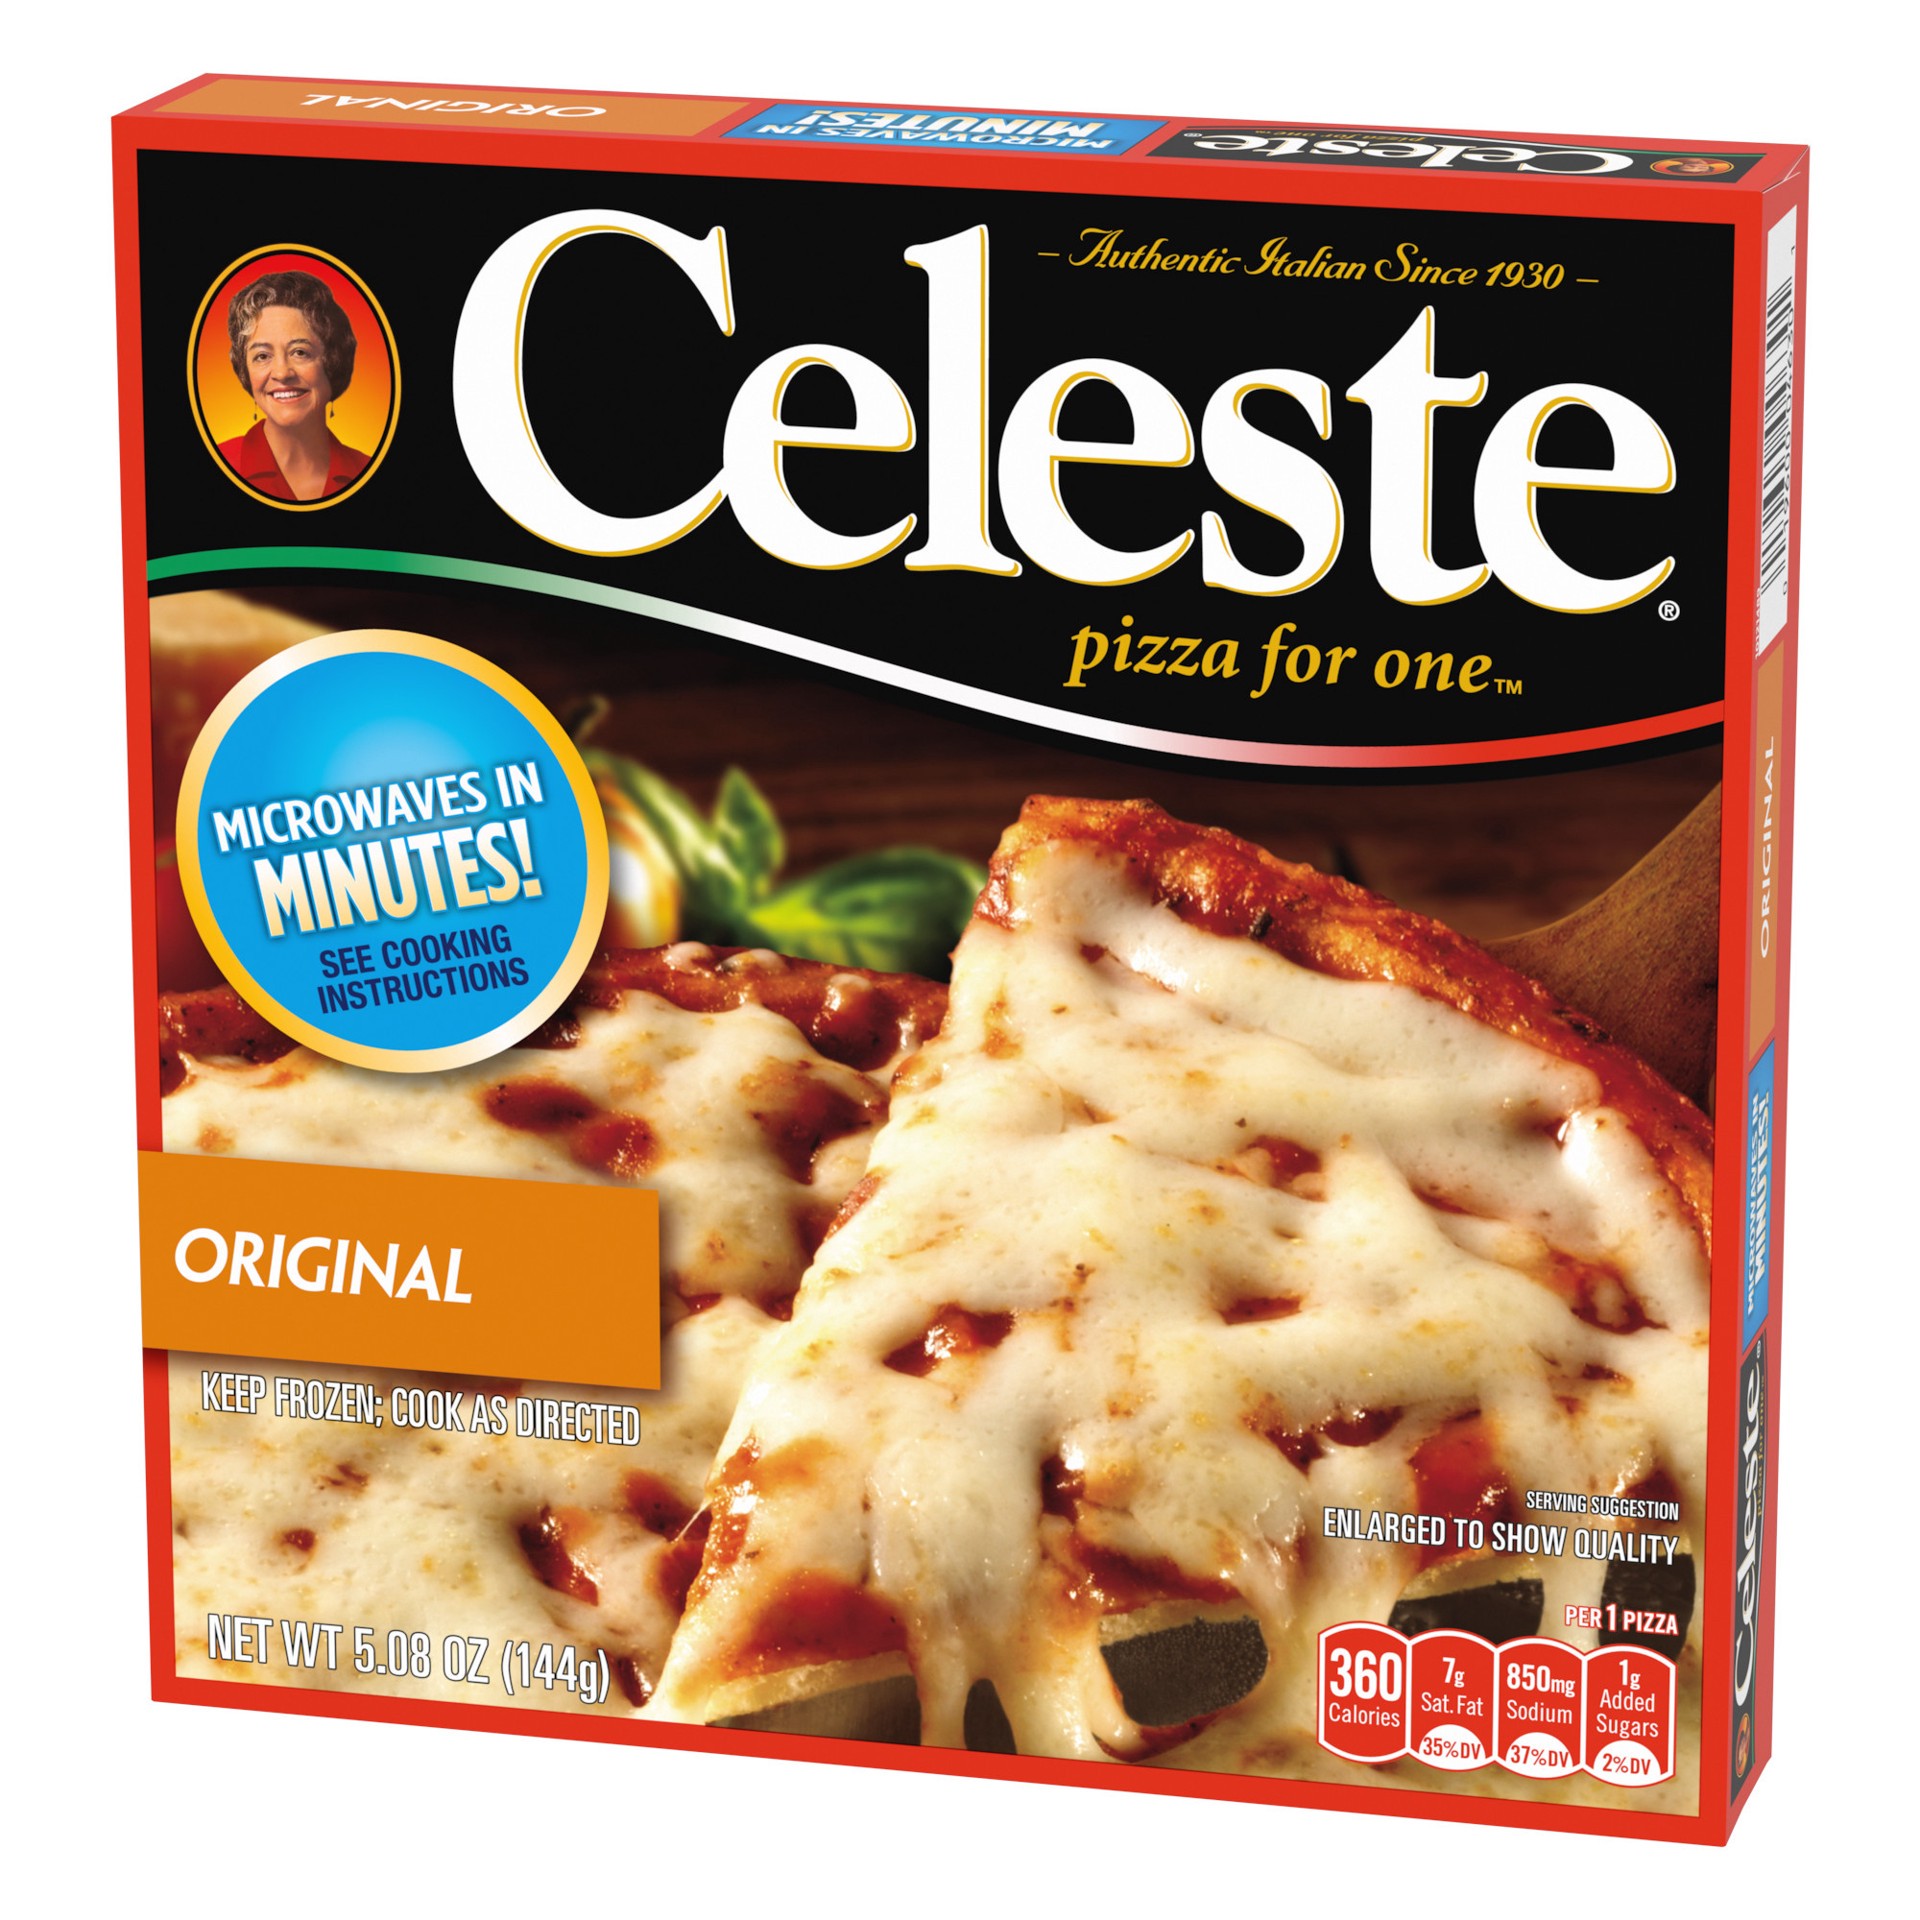 slide 2 of 5, Celeste Original Cheese Pizza for One, Individual Microwavable Frozen Pizza, 5.08 oz., 5.08 oz